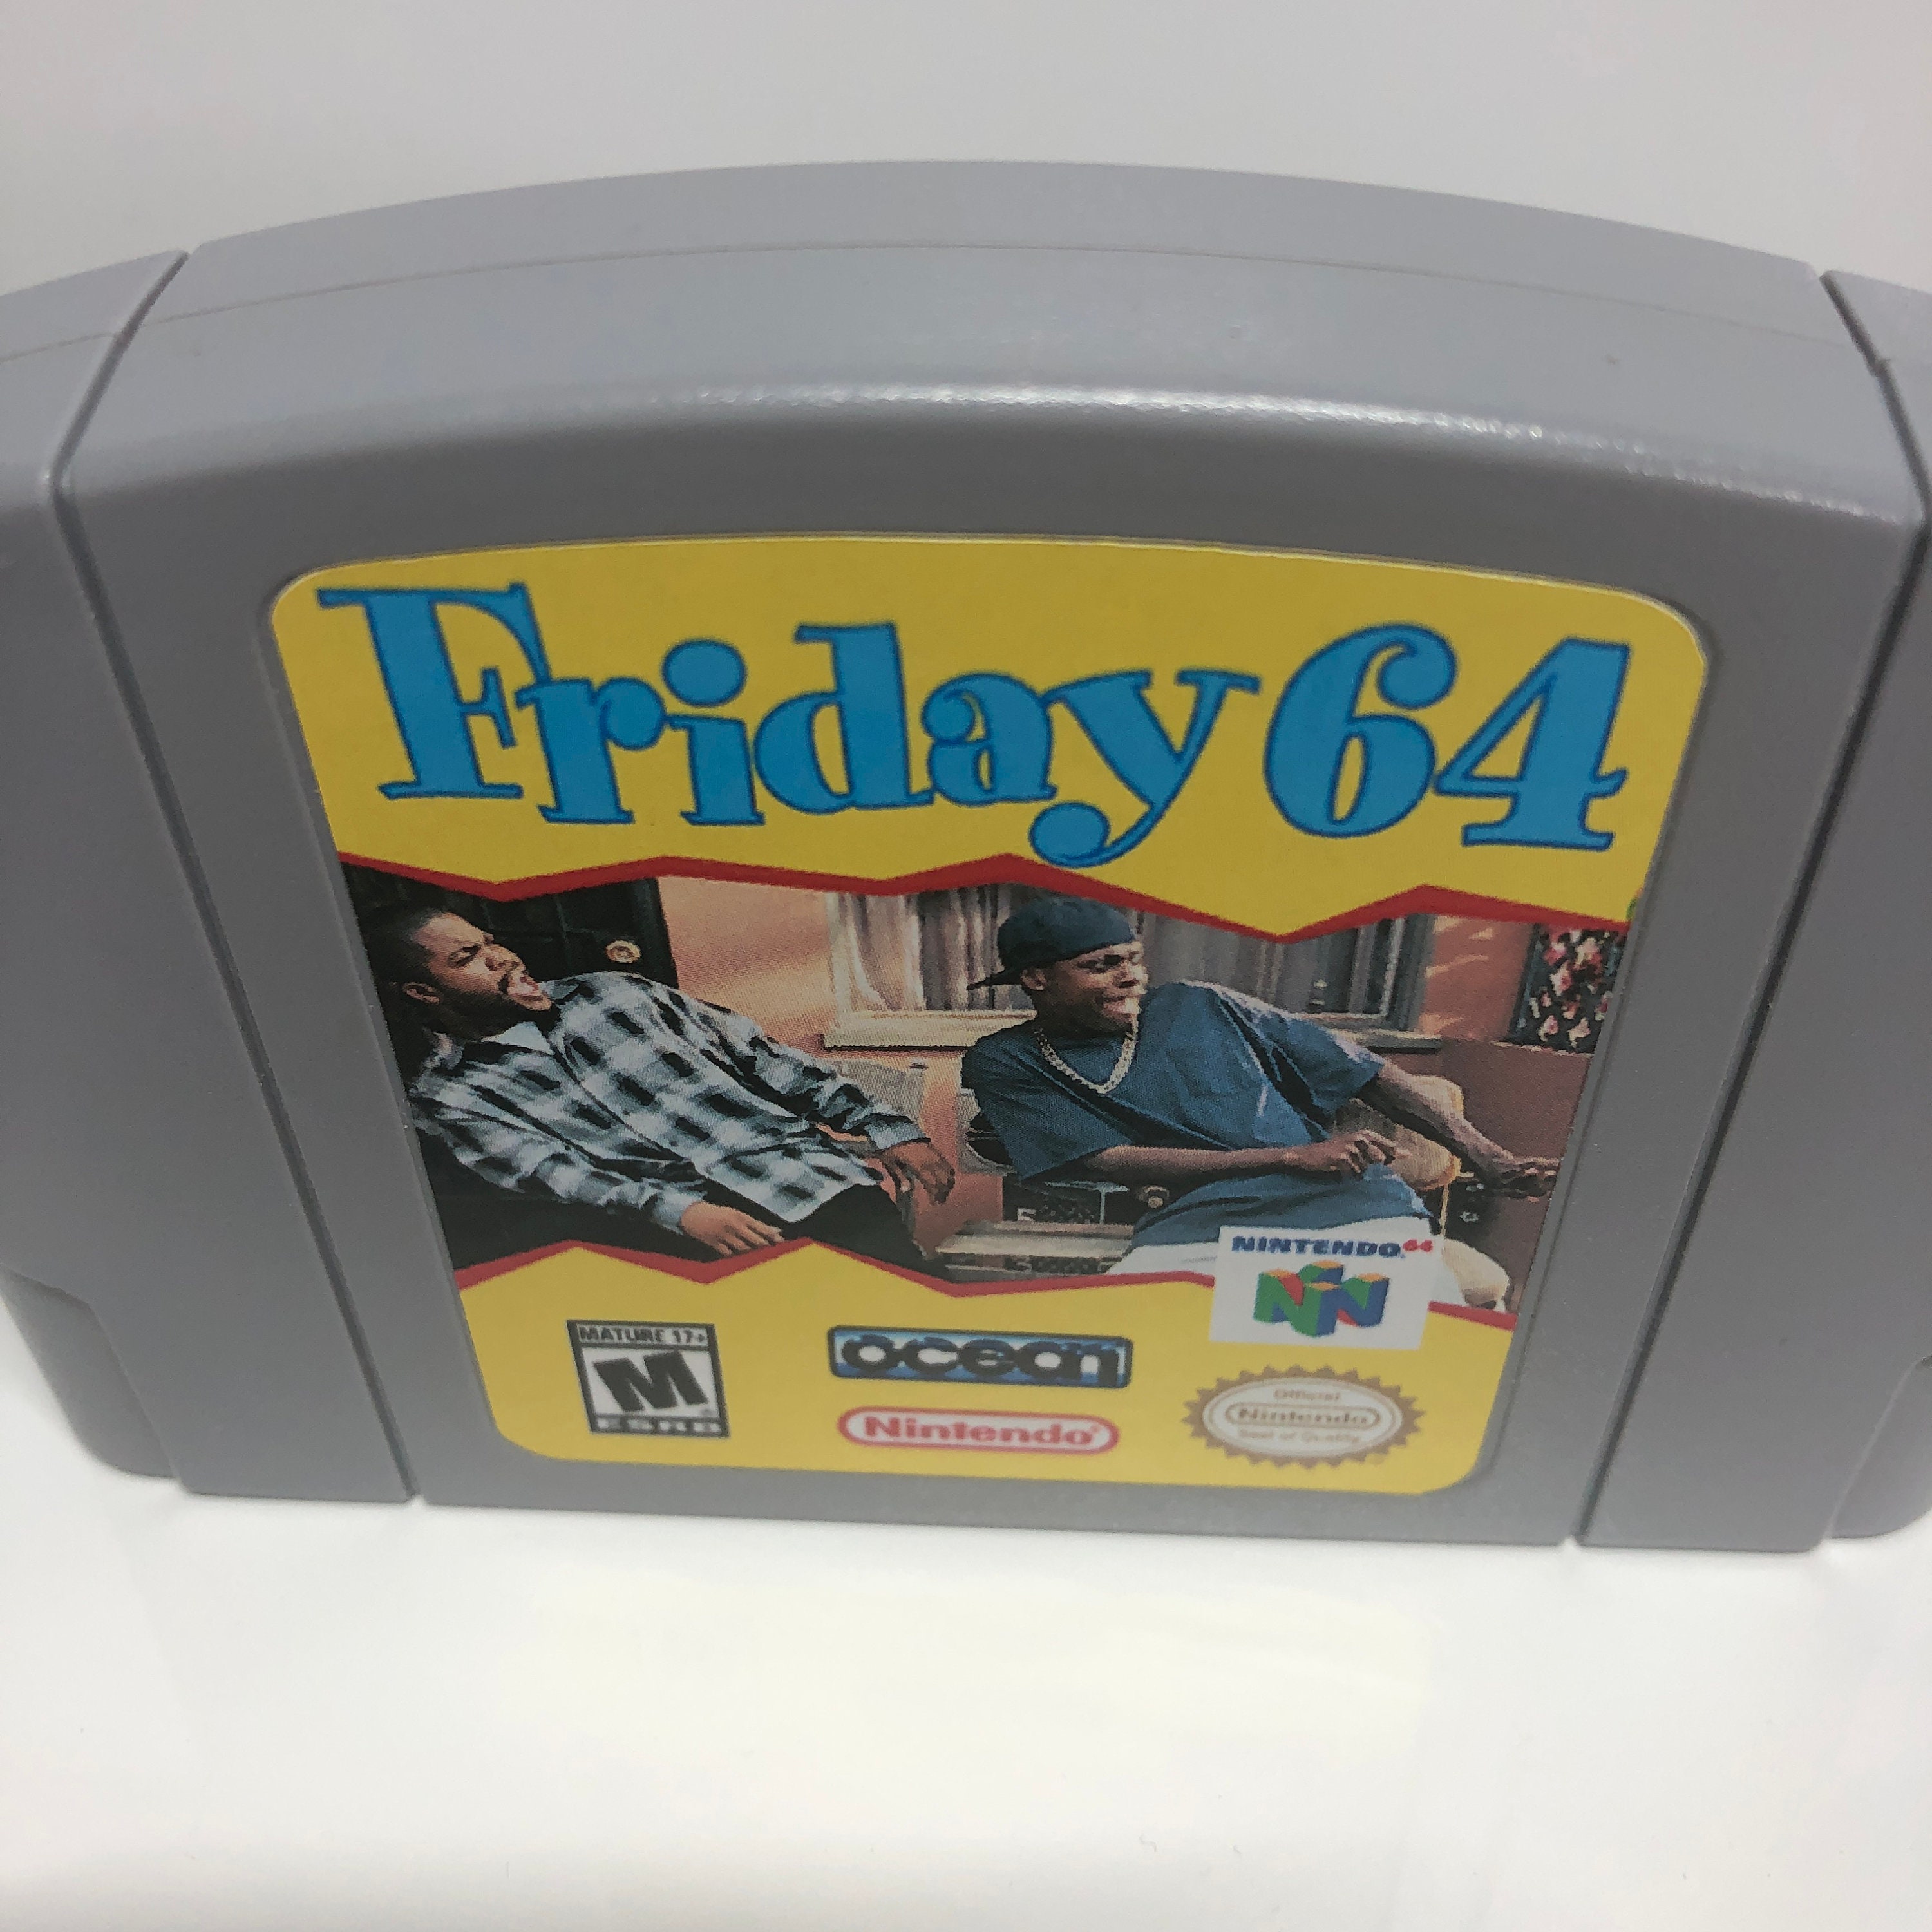 N64 Friday Nintendo 64 Custom Video Game Cartridge - Front AND Back Labels  - Ice Cube Chris Tucker 1995 Comedy Parody Item